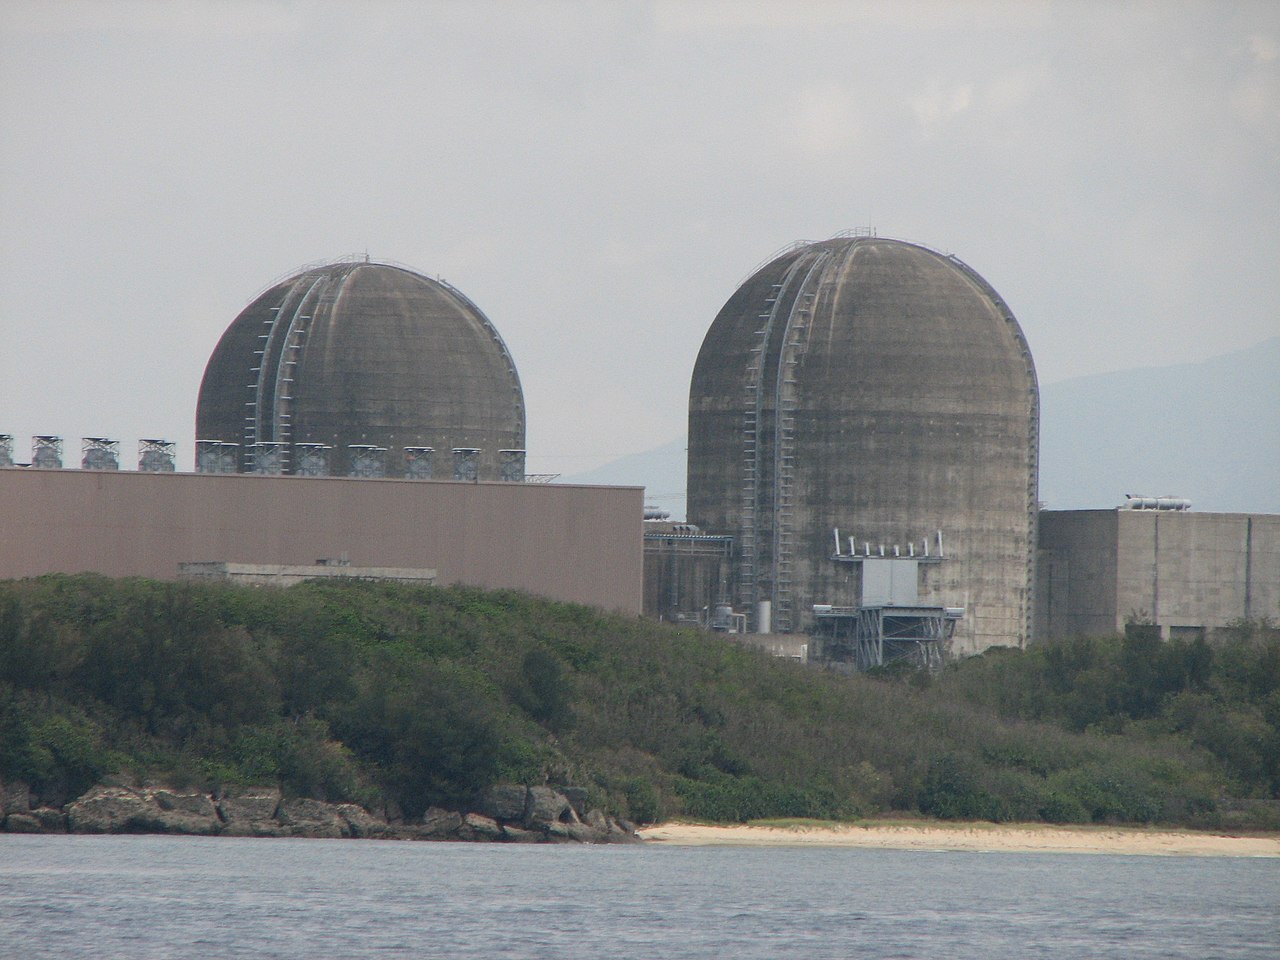 Plans to decommission nuclear reactor continue amidst power shortage concerns